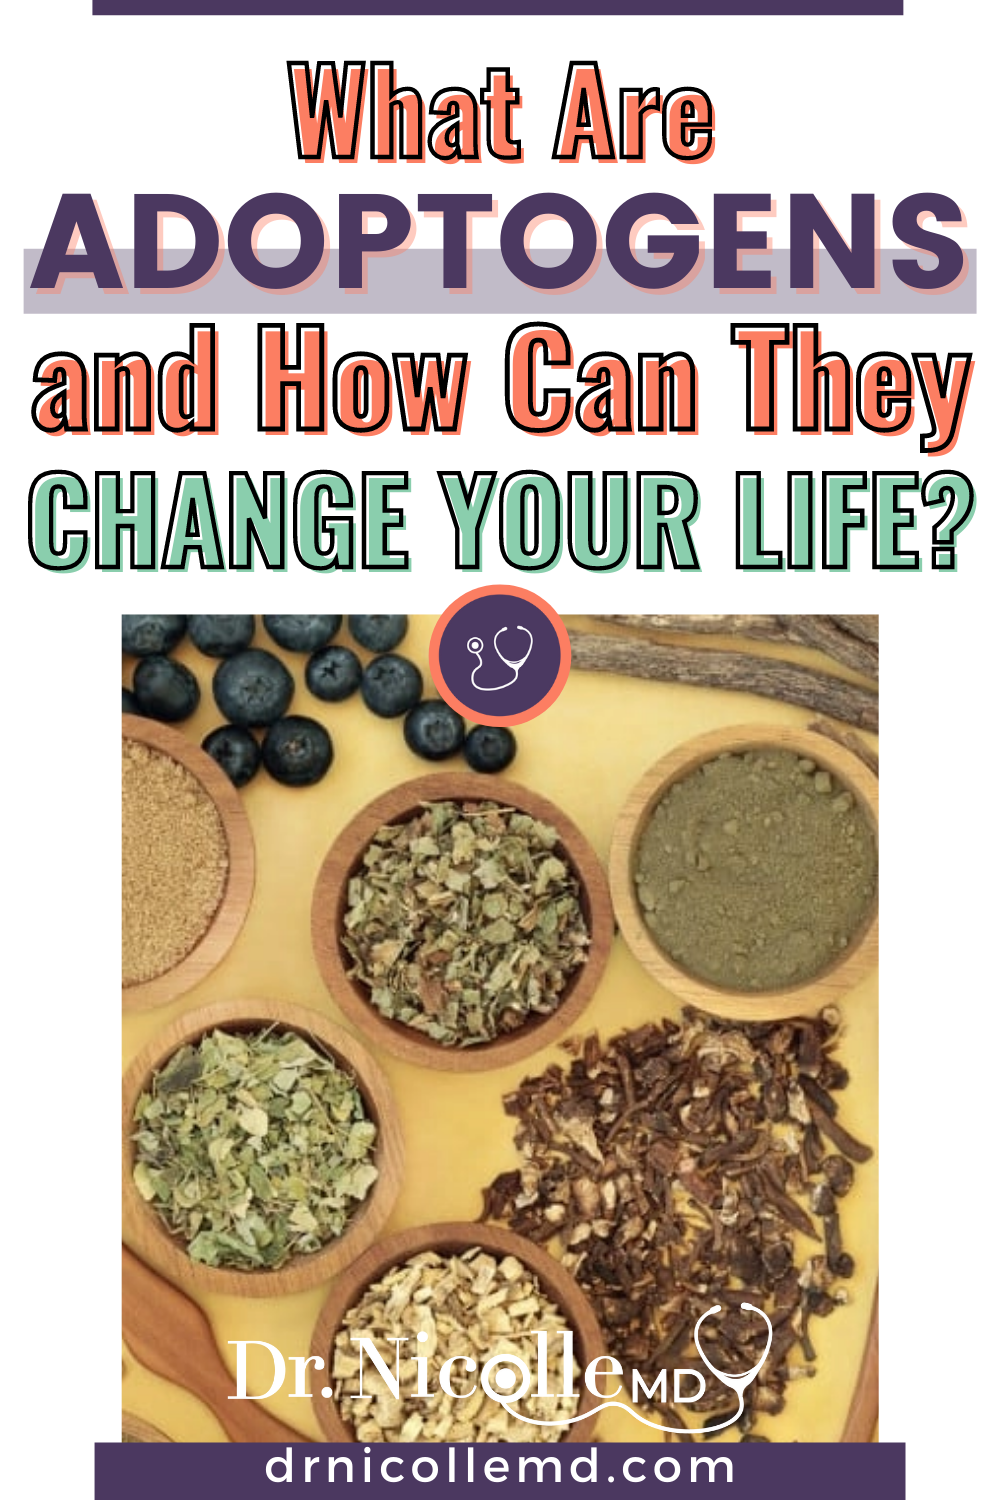 What Are Adaptogens and How Can They Change Your Life?